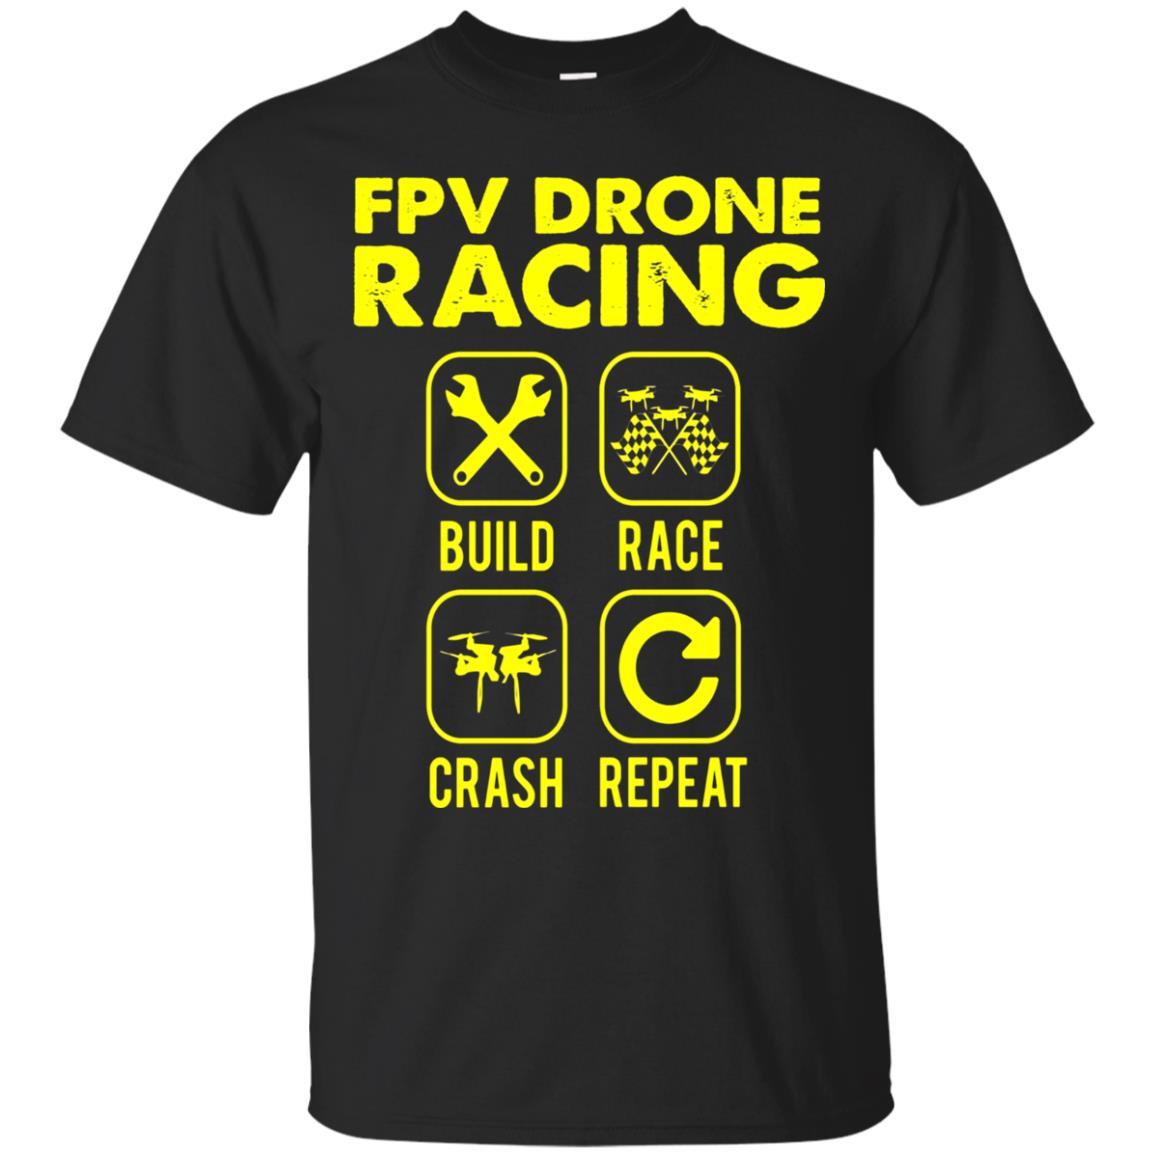 Funny Fpv Drone Racing T-shirt Quad Copter Rc Gift